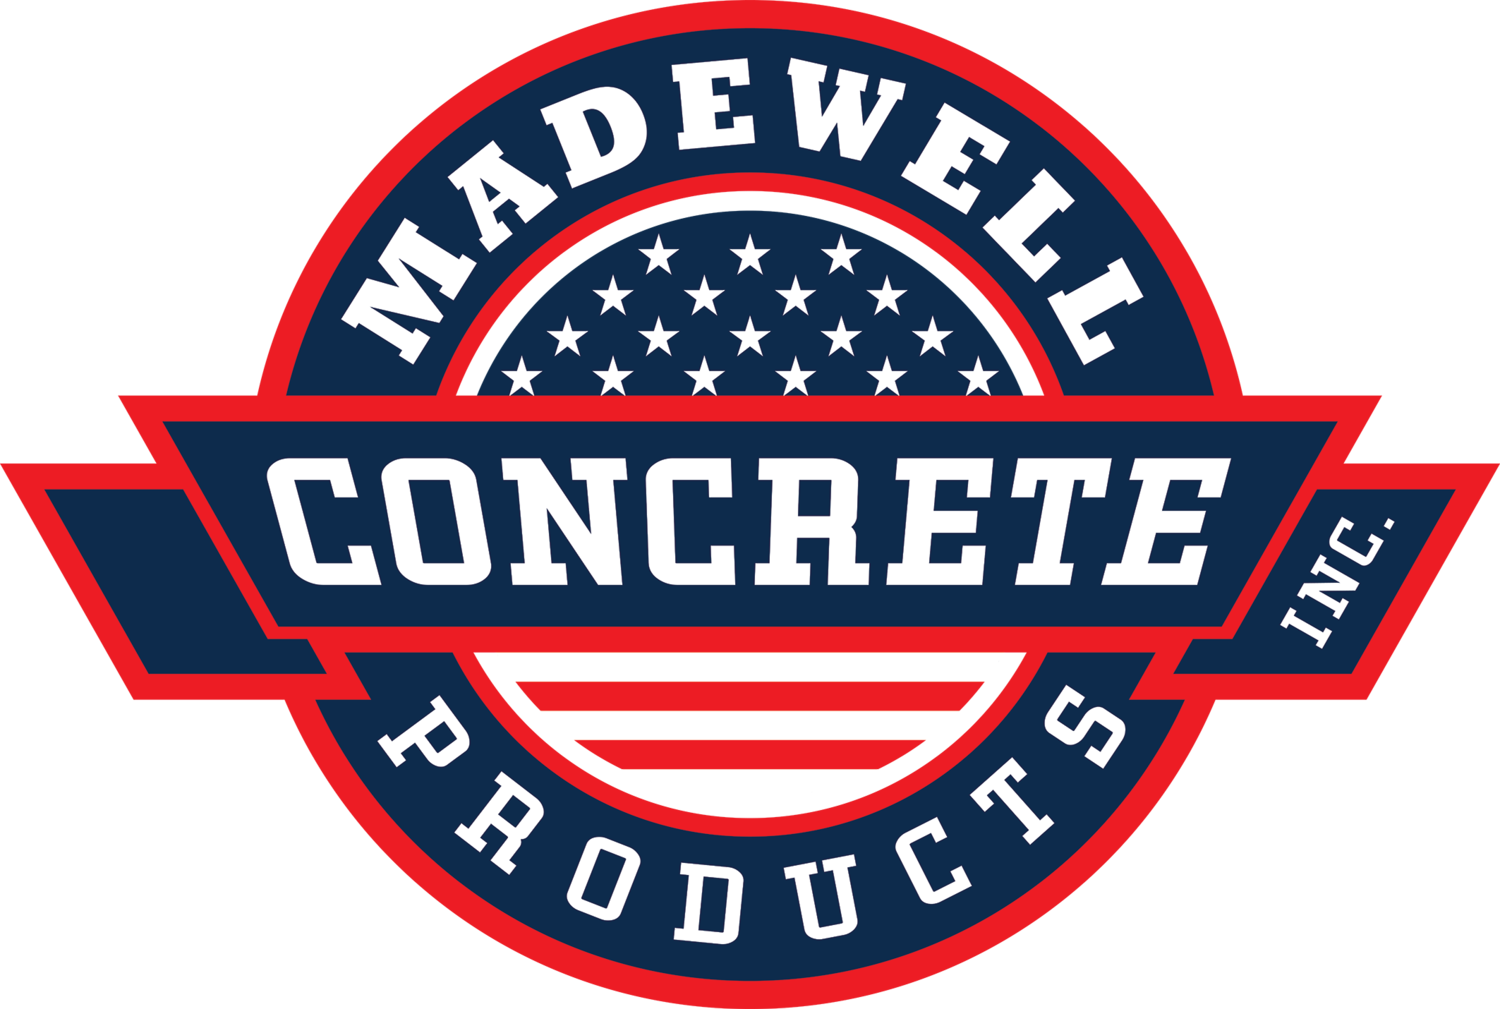 Madewell Concrete Products